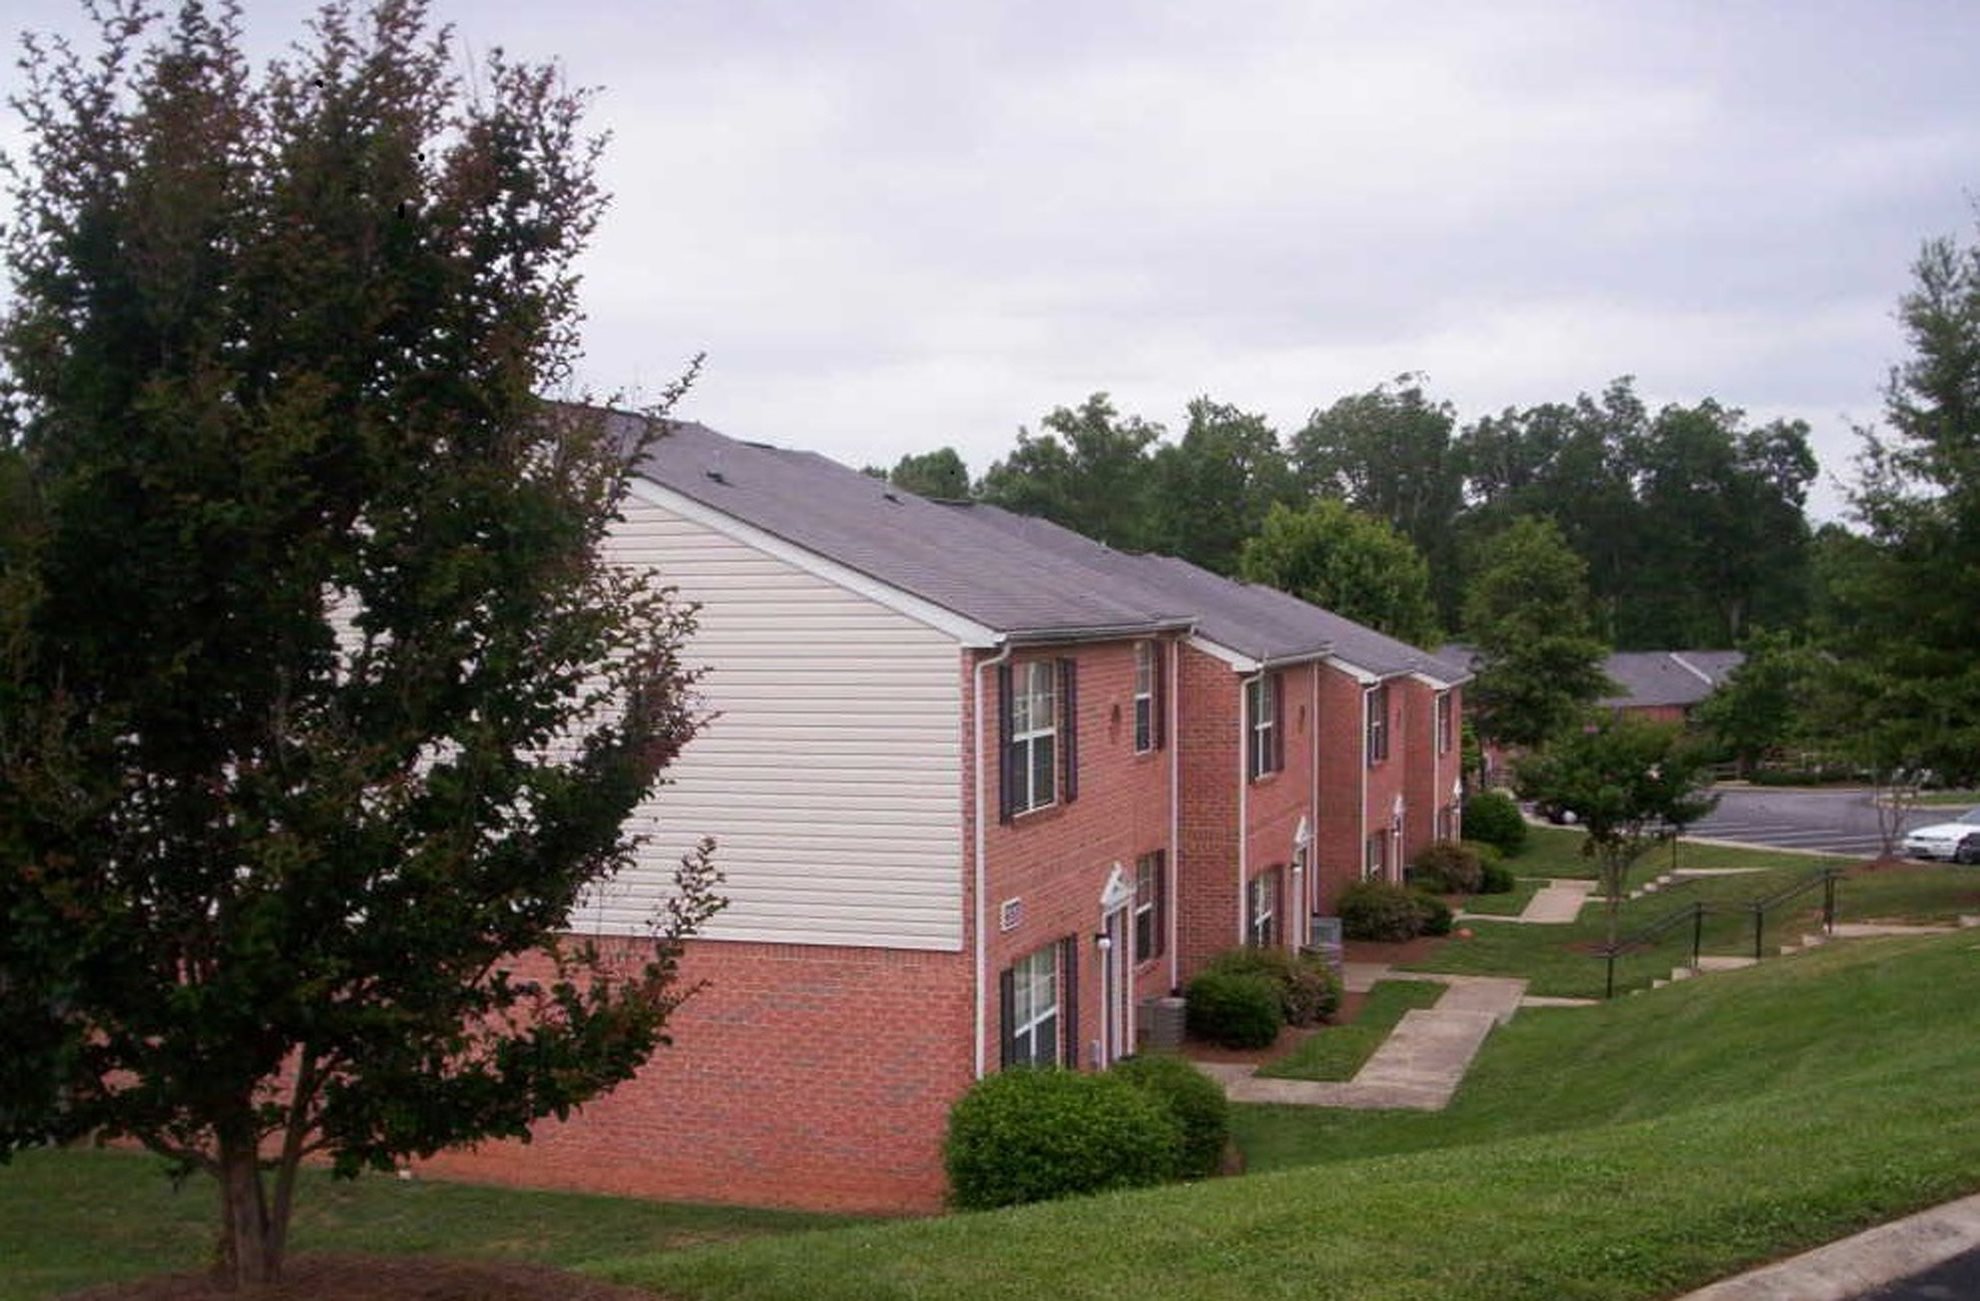 Orchard Pointe Apartments